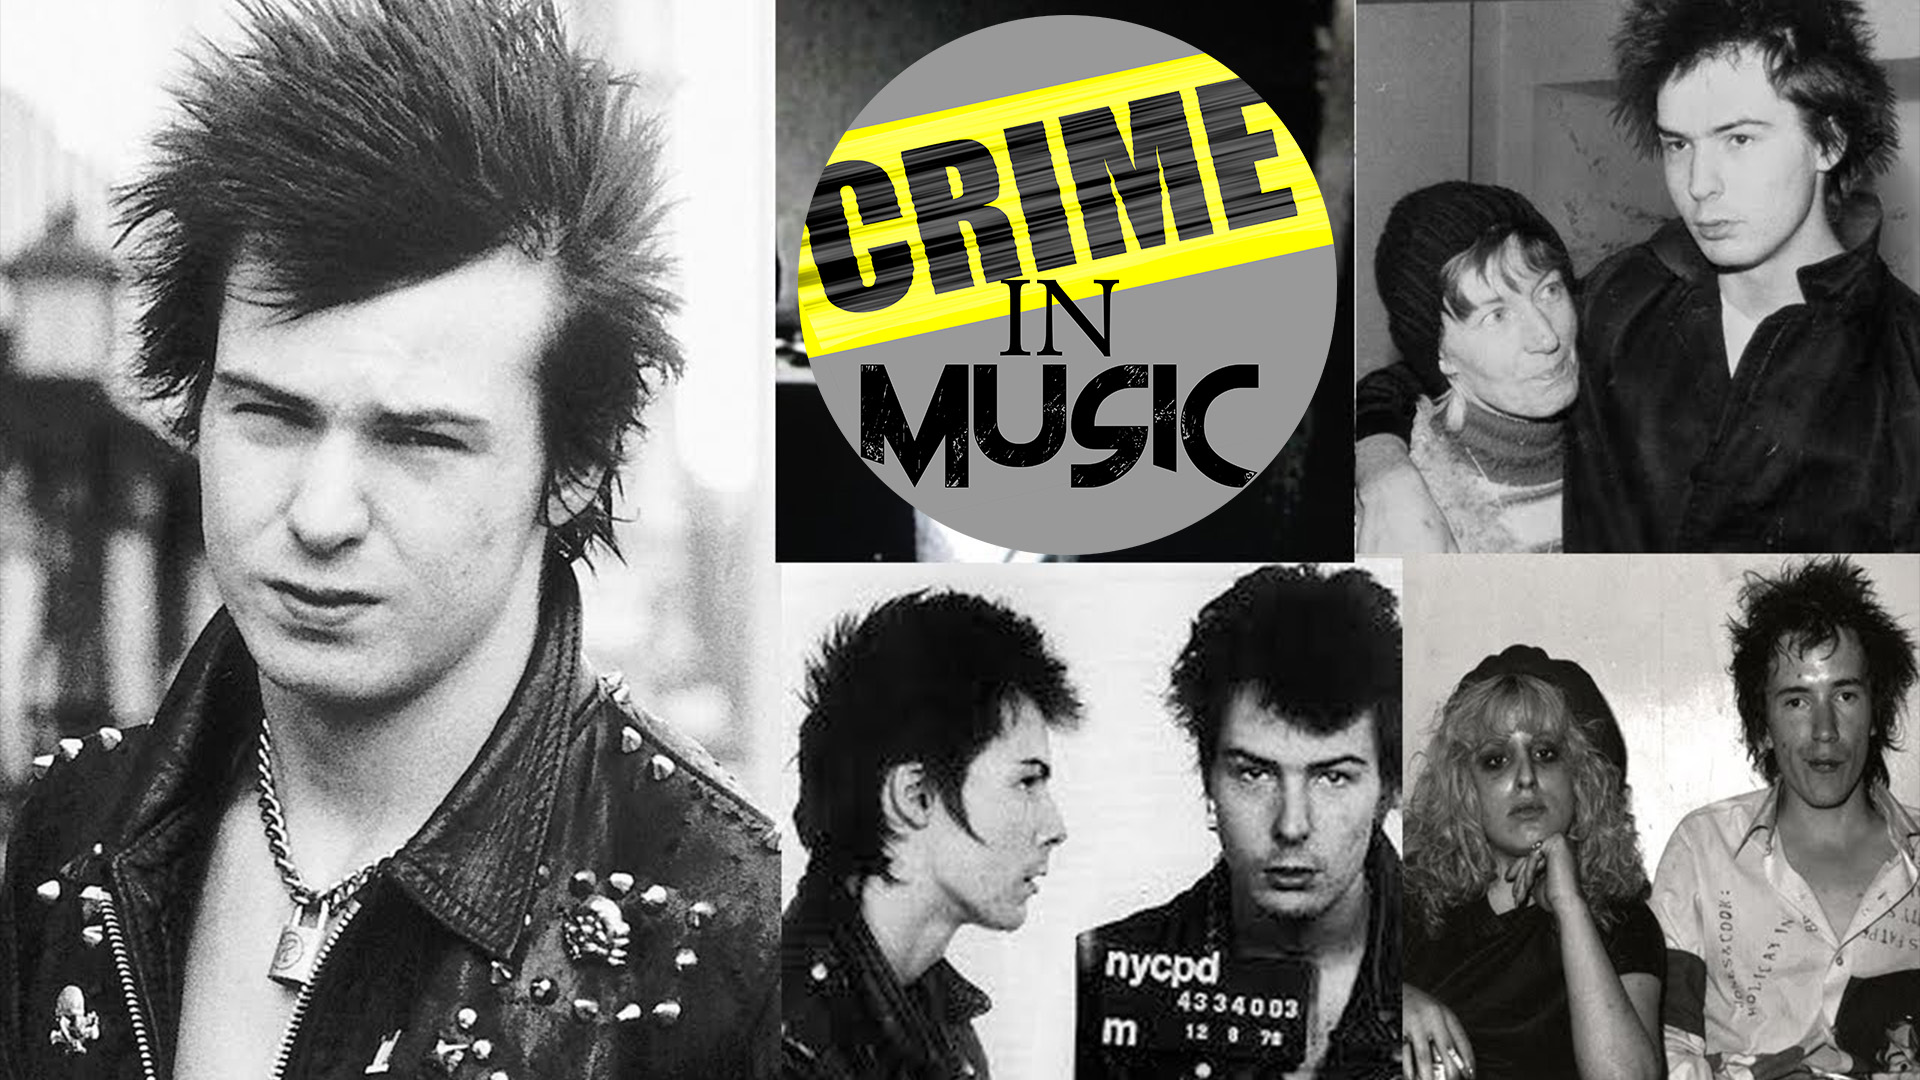 photo collage of Sid Vicious, Musician, punk music